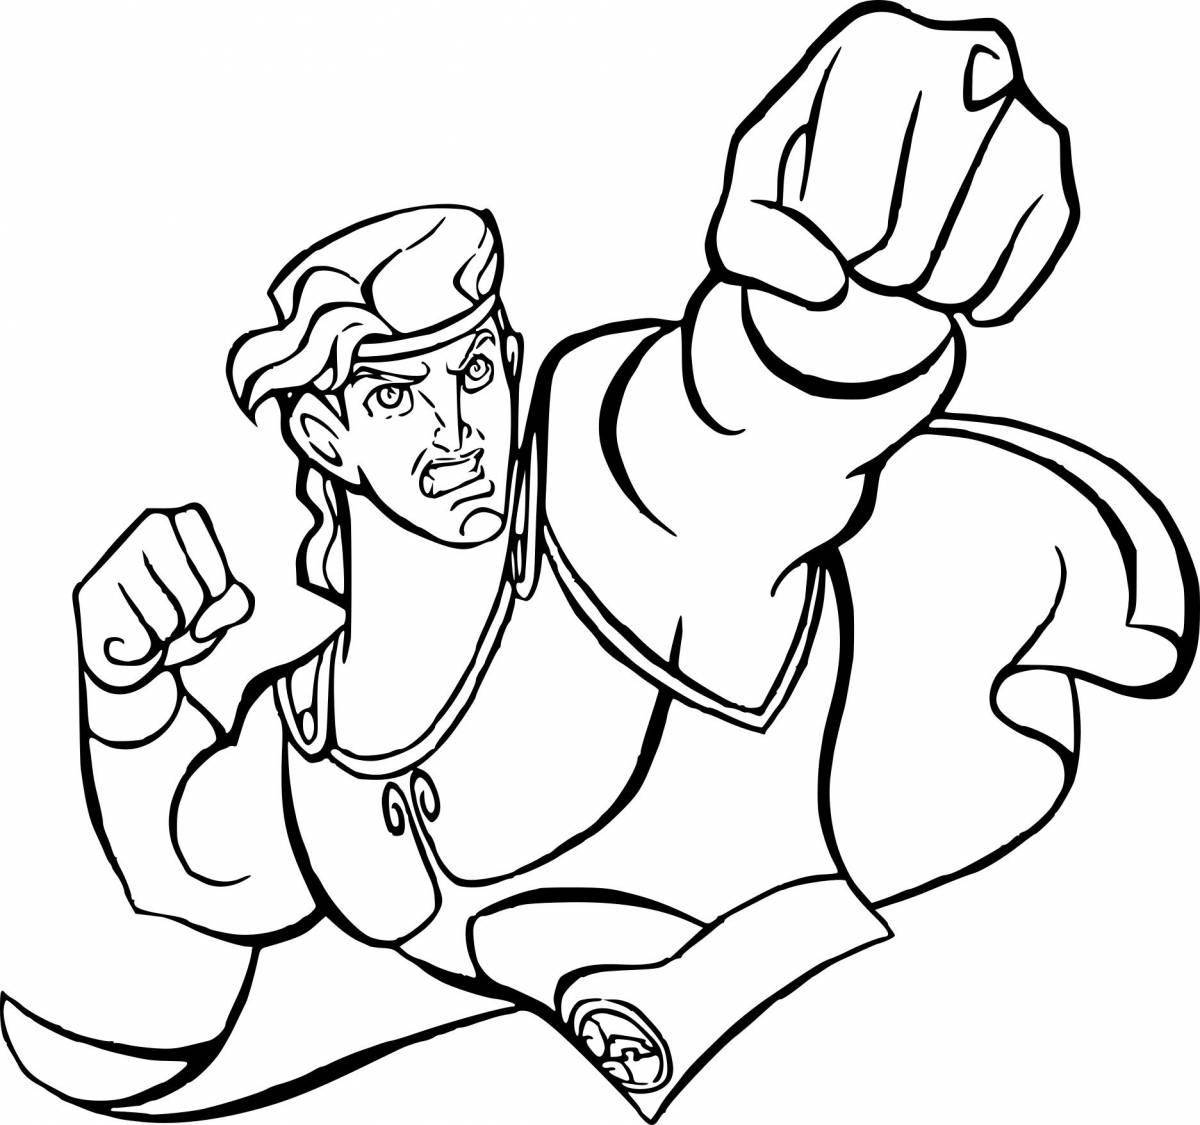 Majestic hercules coloring page